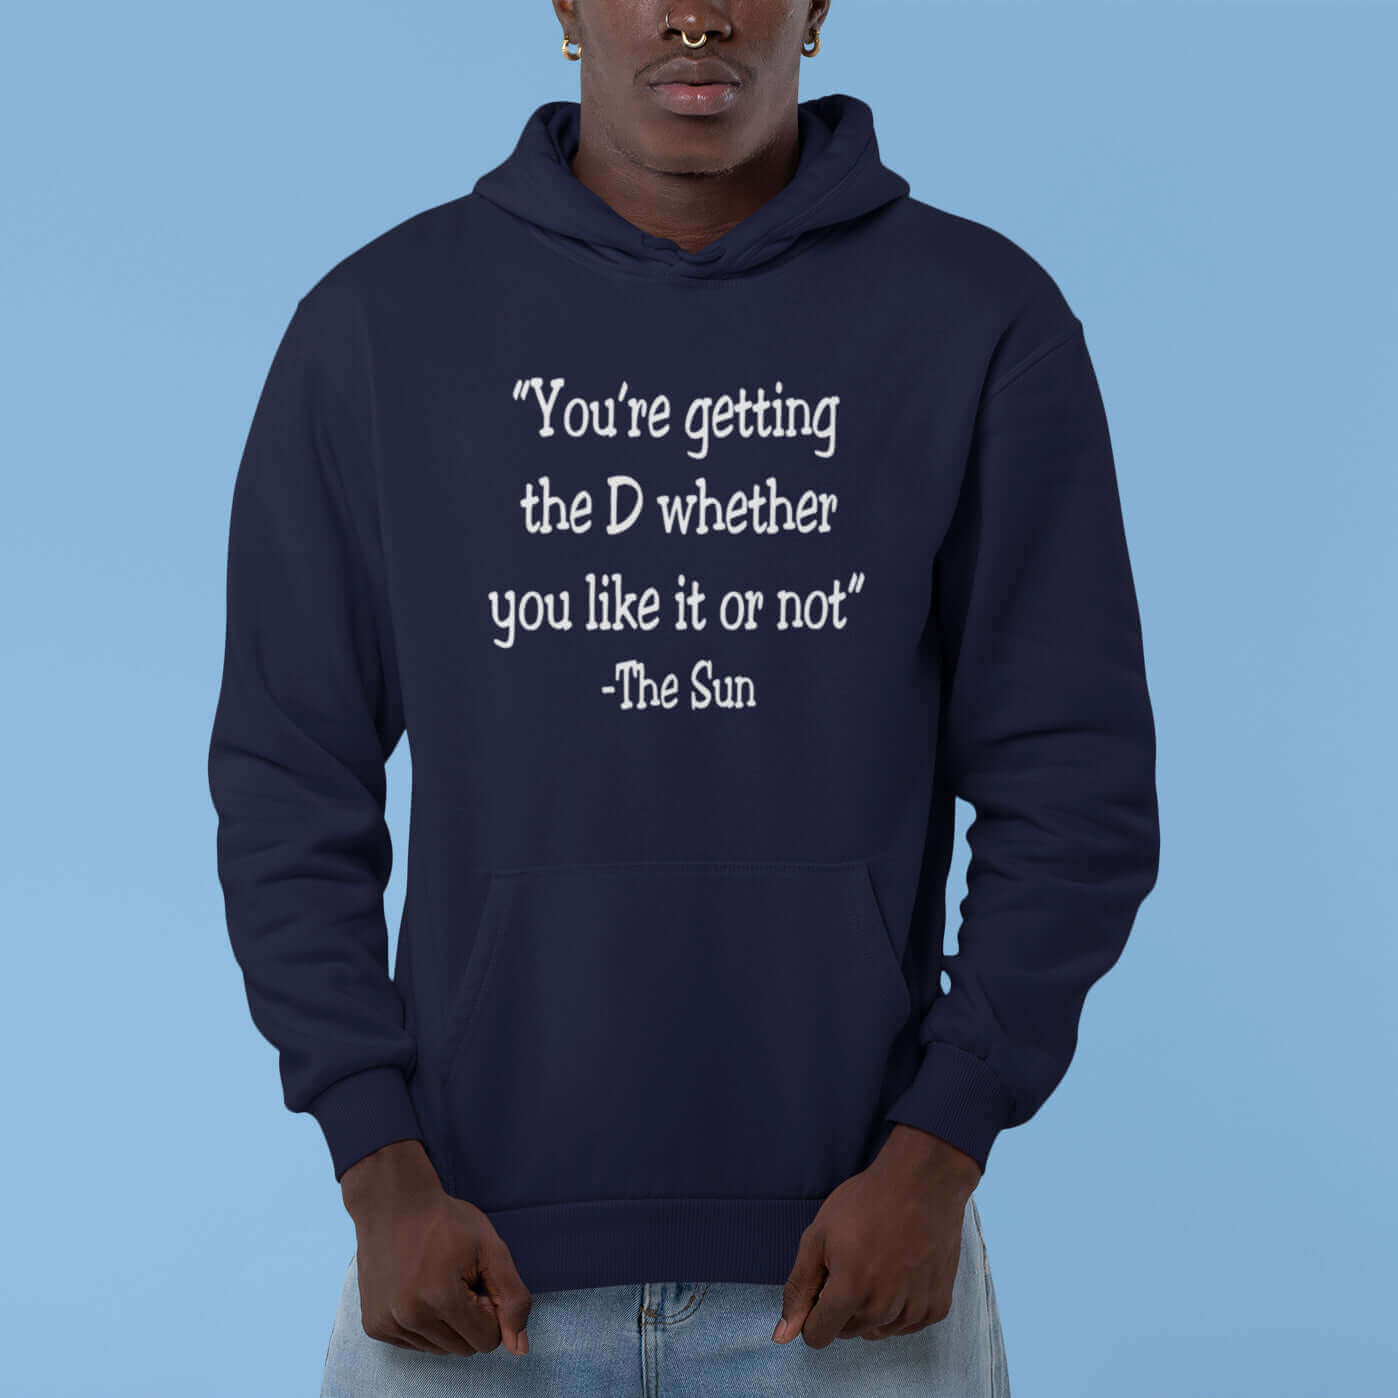 Man wearing a navy blue hoodie sweatshirt with the Sun quote You're getting the D whether you like it or not printed on the front.